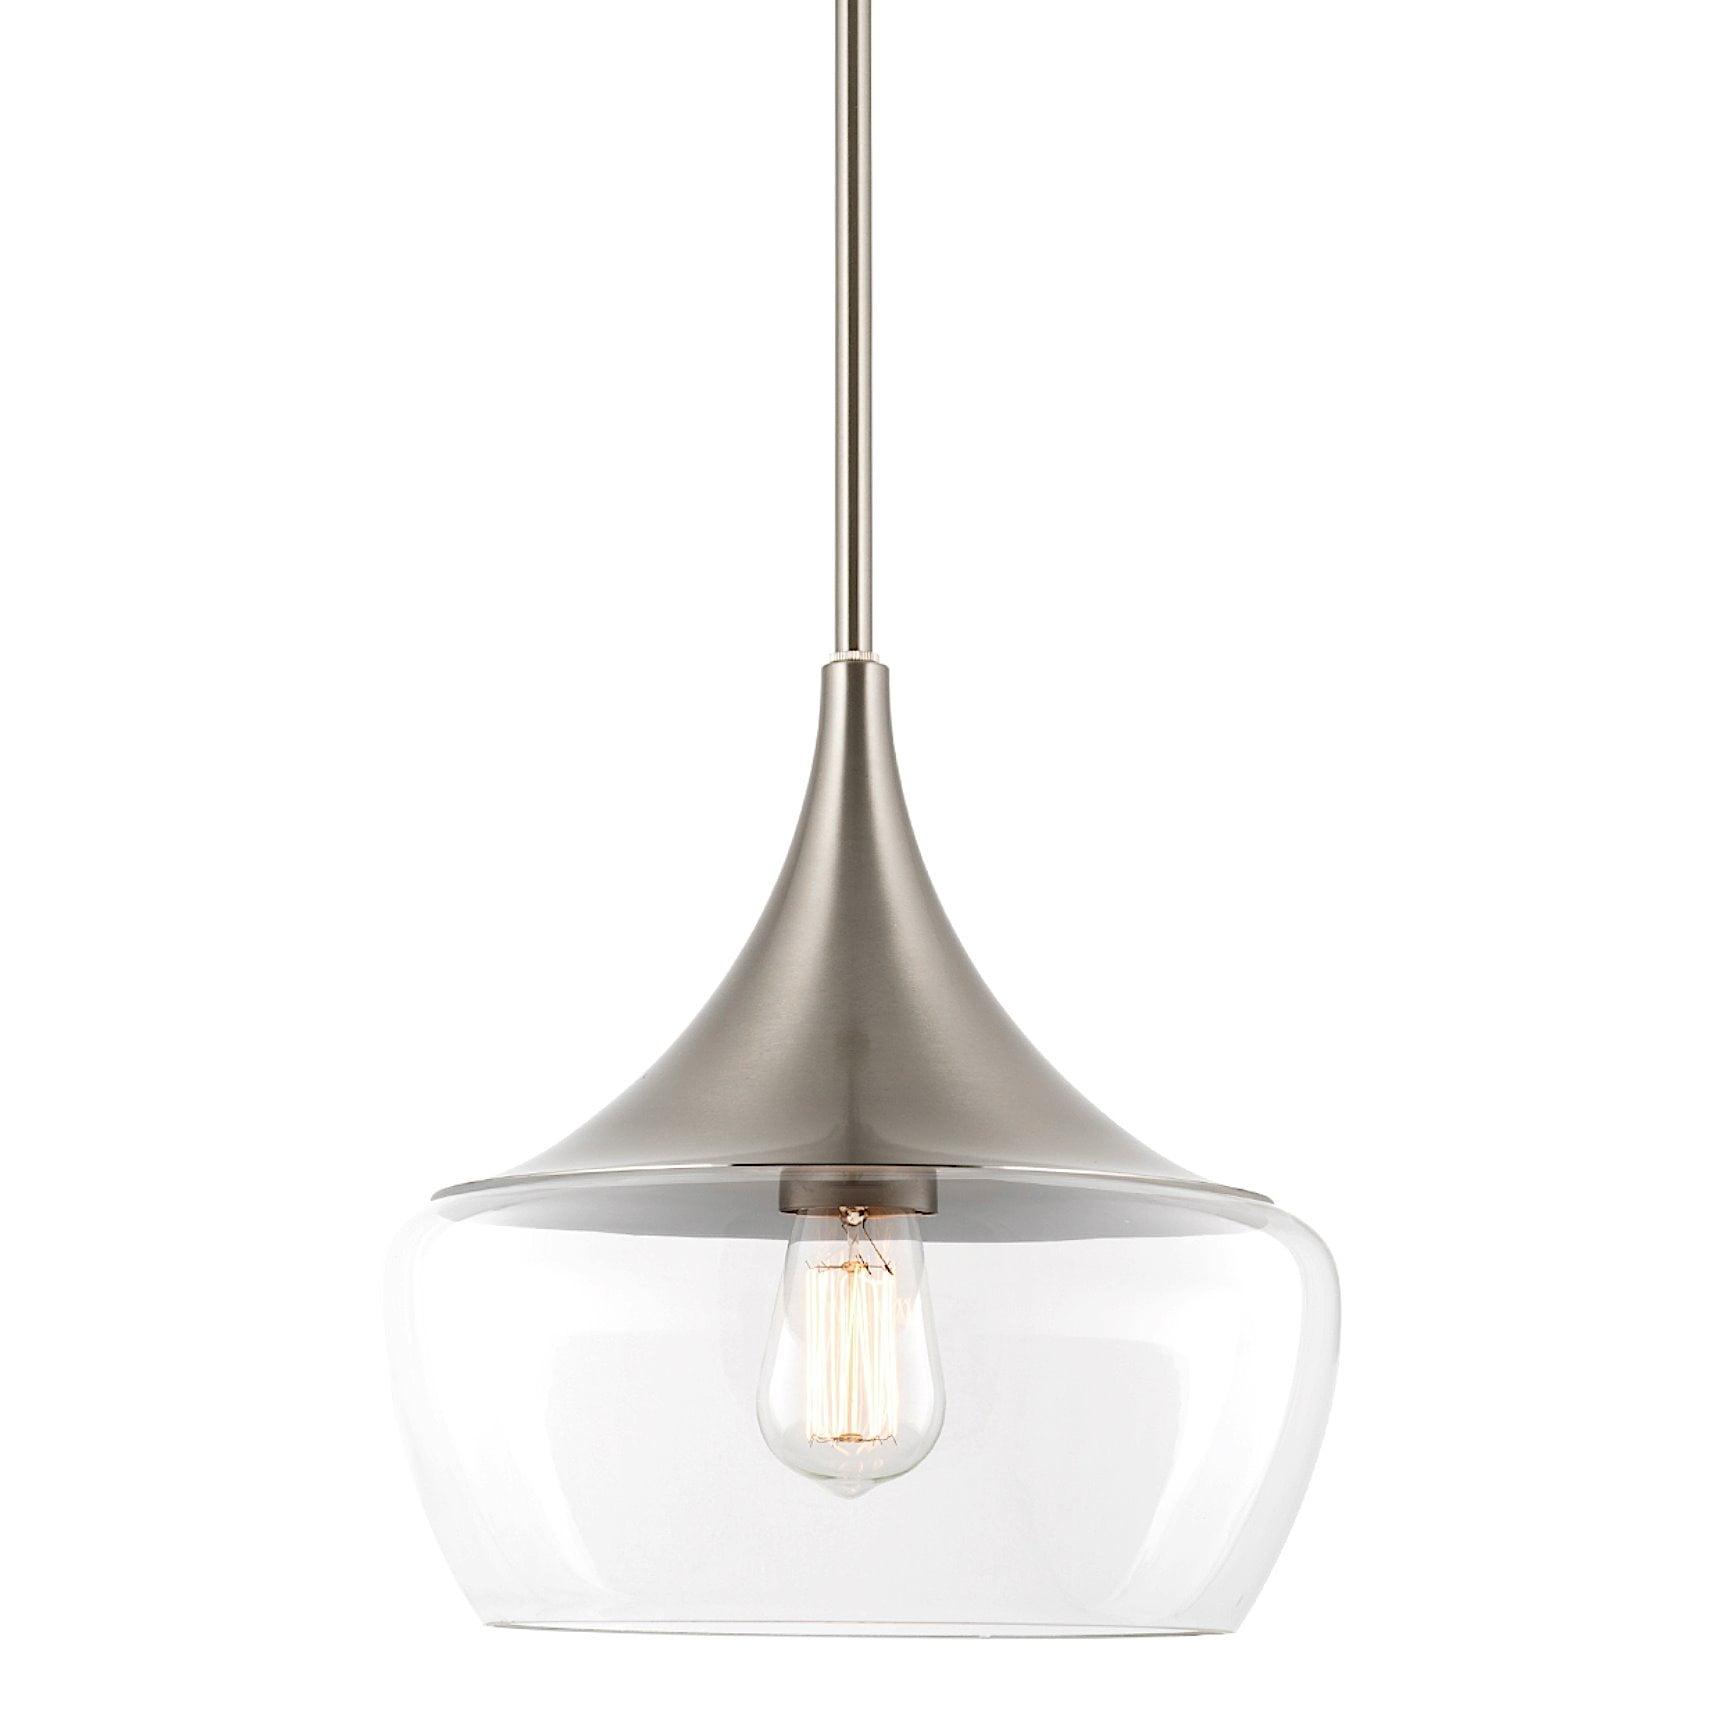 Ava 13" Brushed Nickel Schoolhouse Pendant with Clear Glass Shade